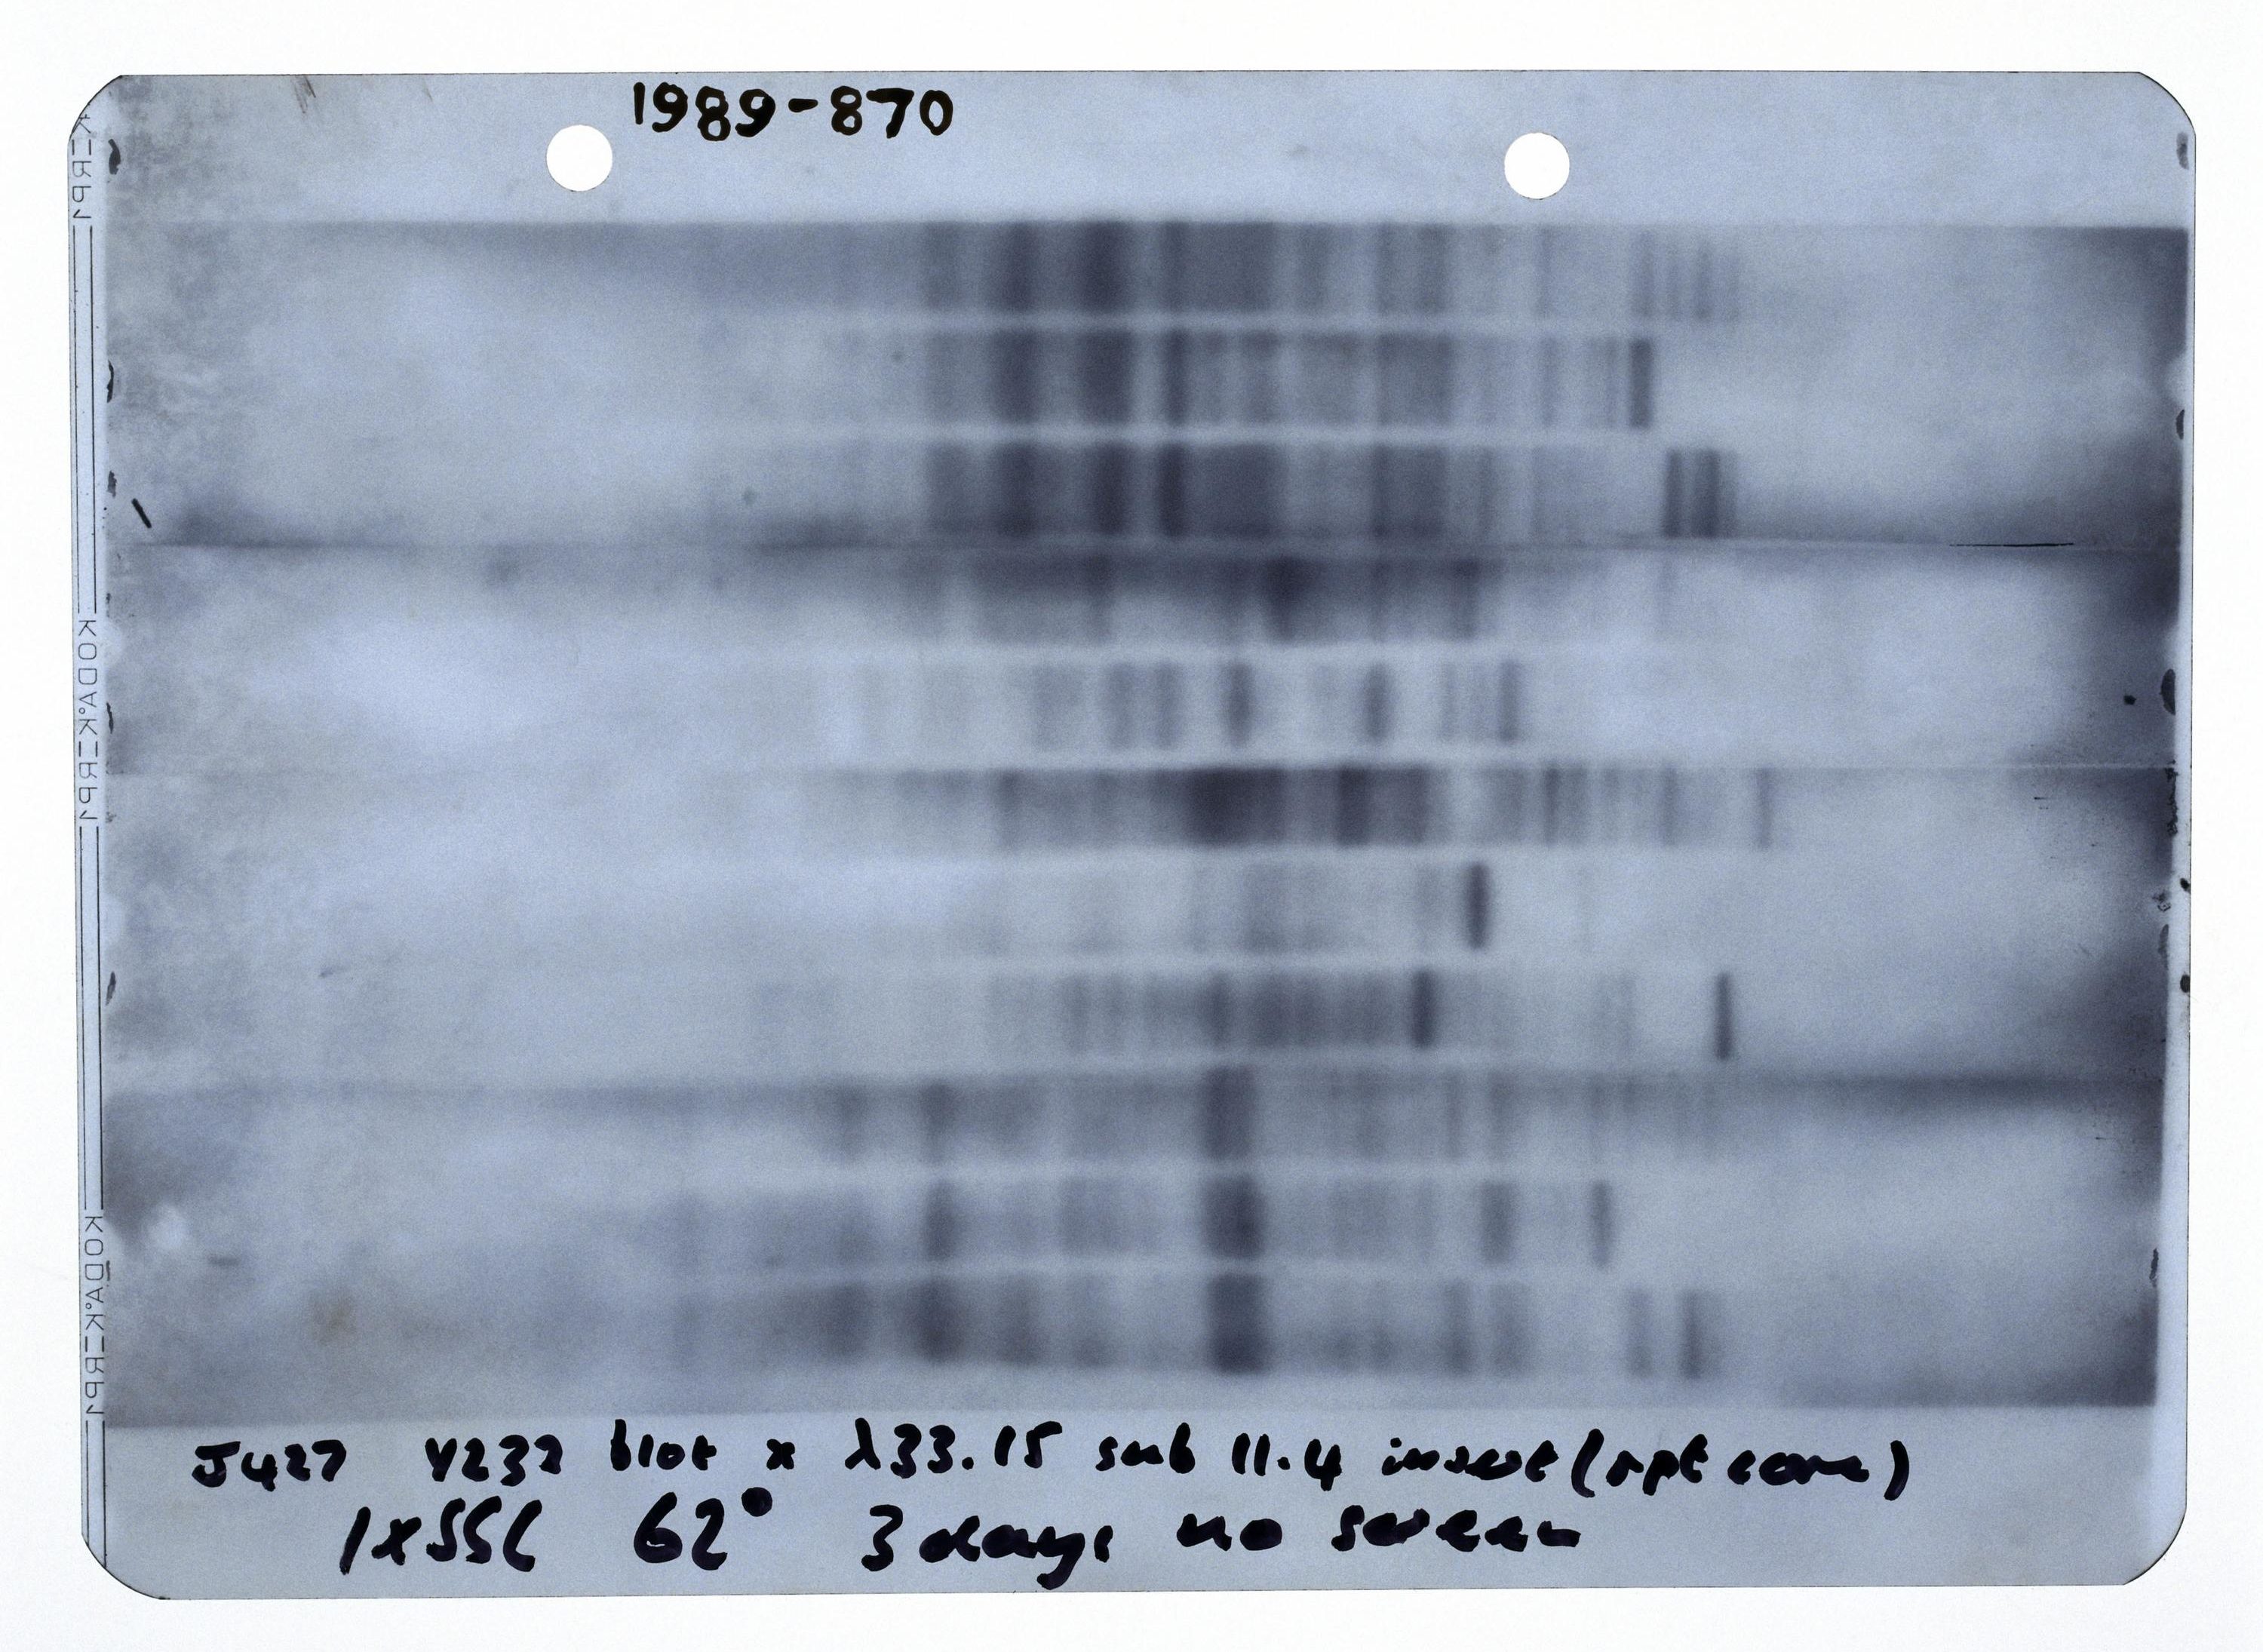 The first genetic fingerprint, prepared by Alec Jeffreys at Leicester University on 19 September 1984. Image: Science Museum Group